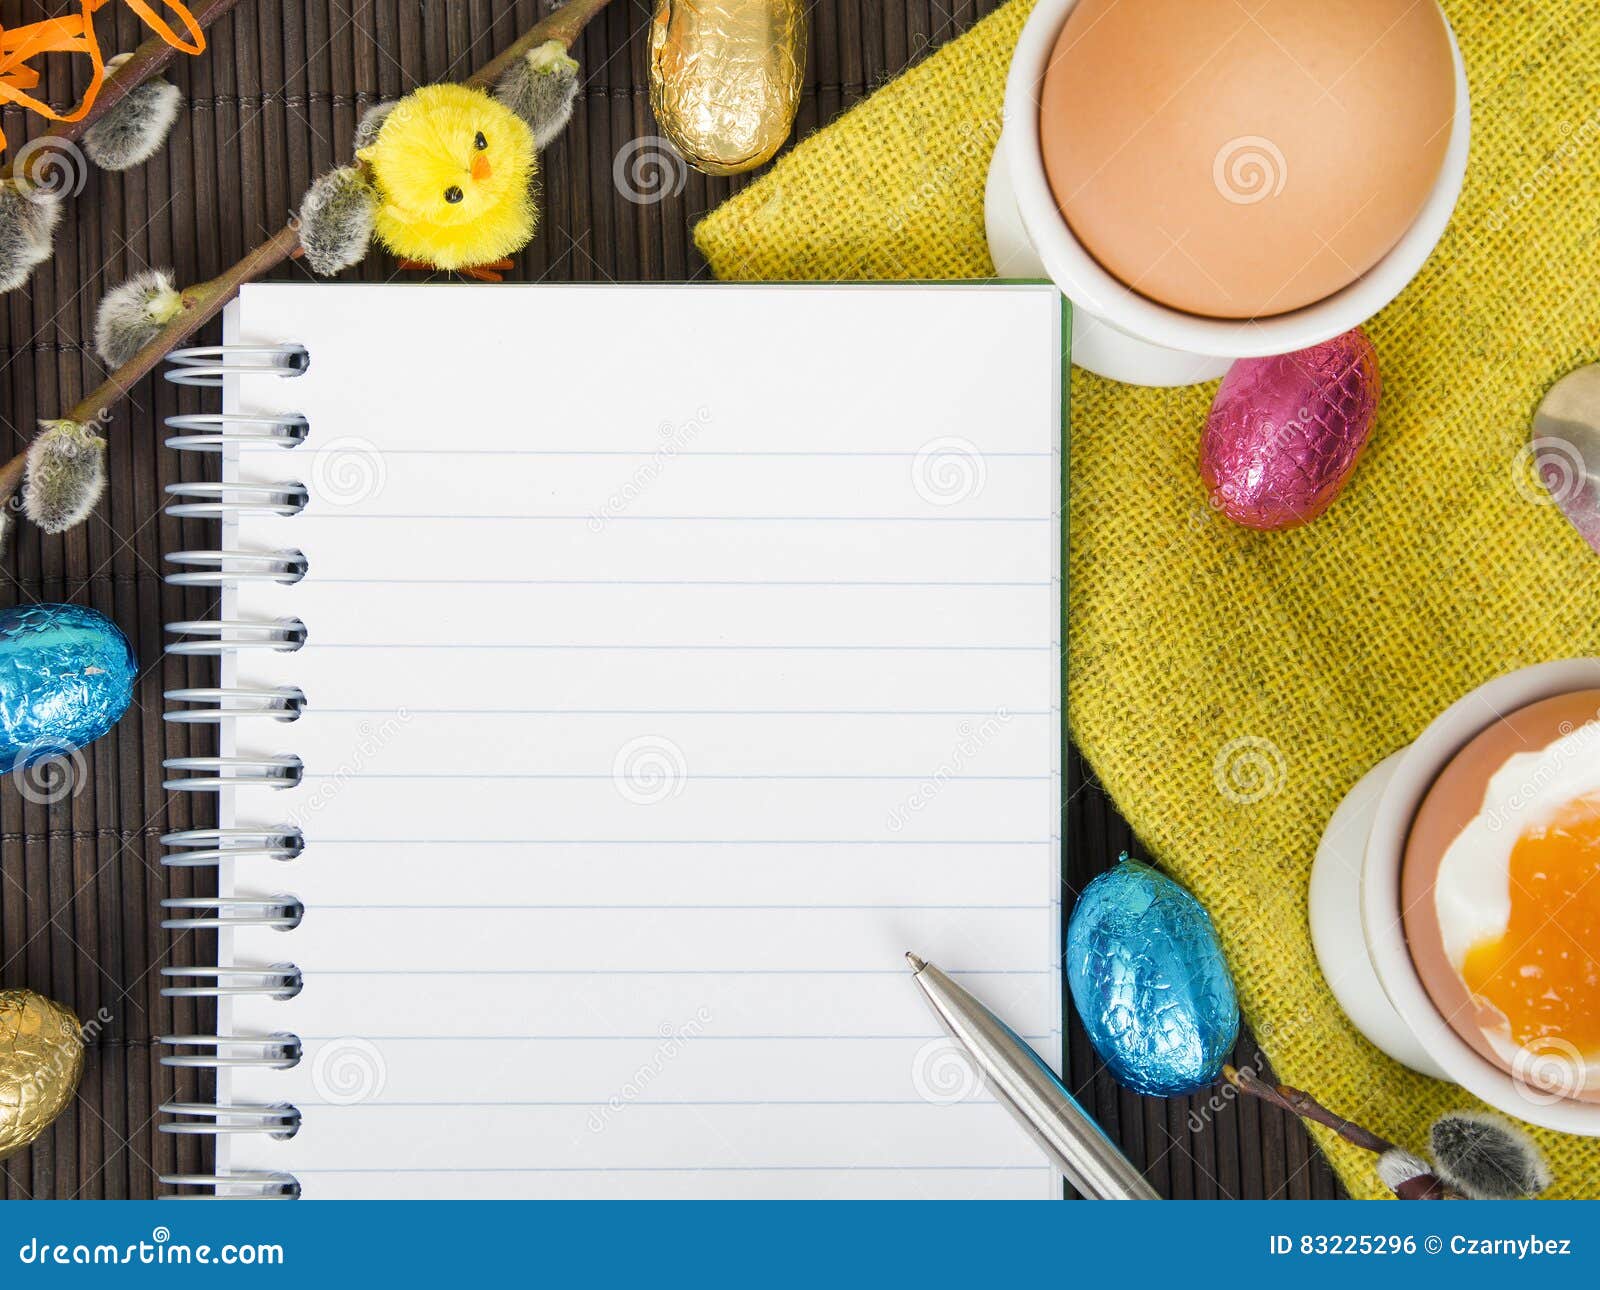 Blank notebook and Easter decorations, shopping list